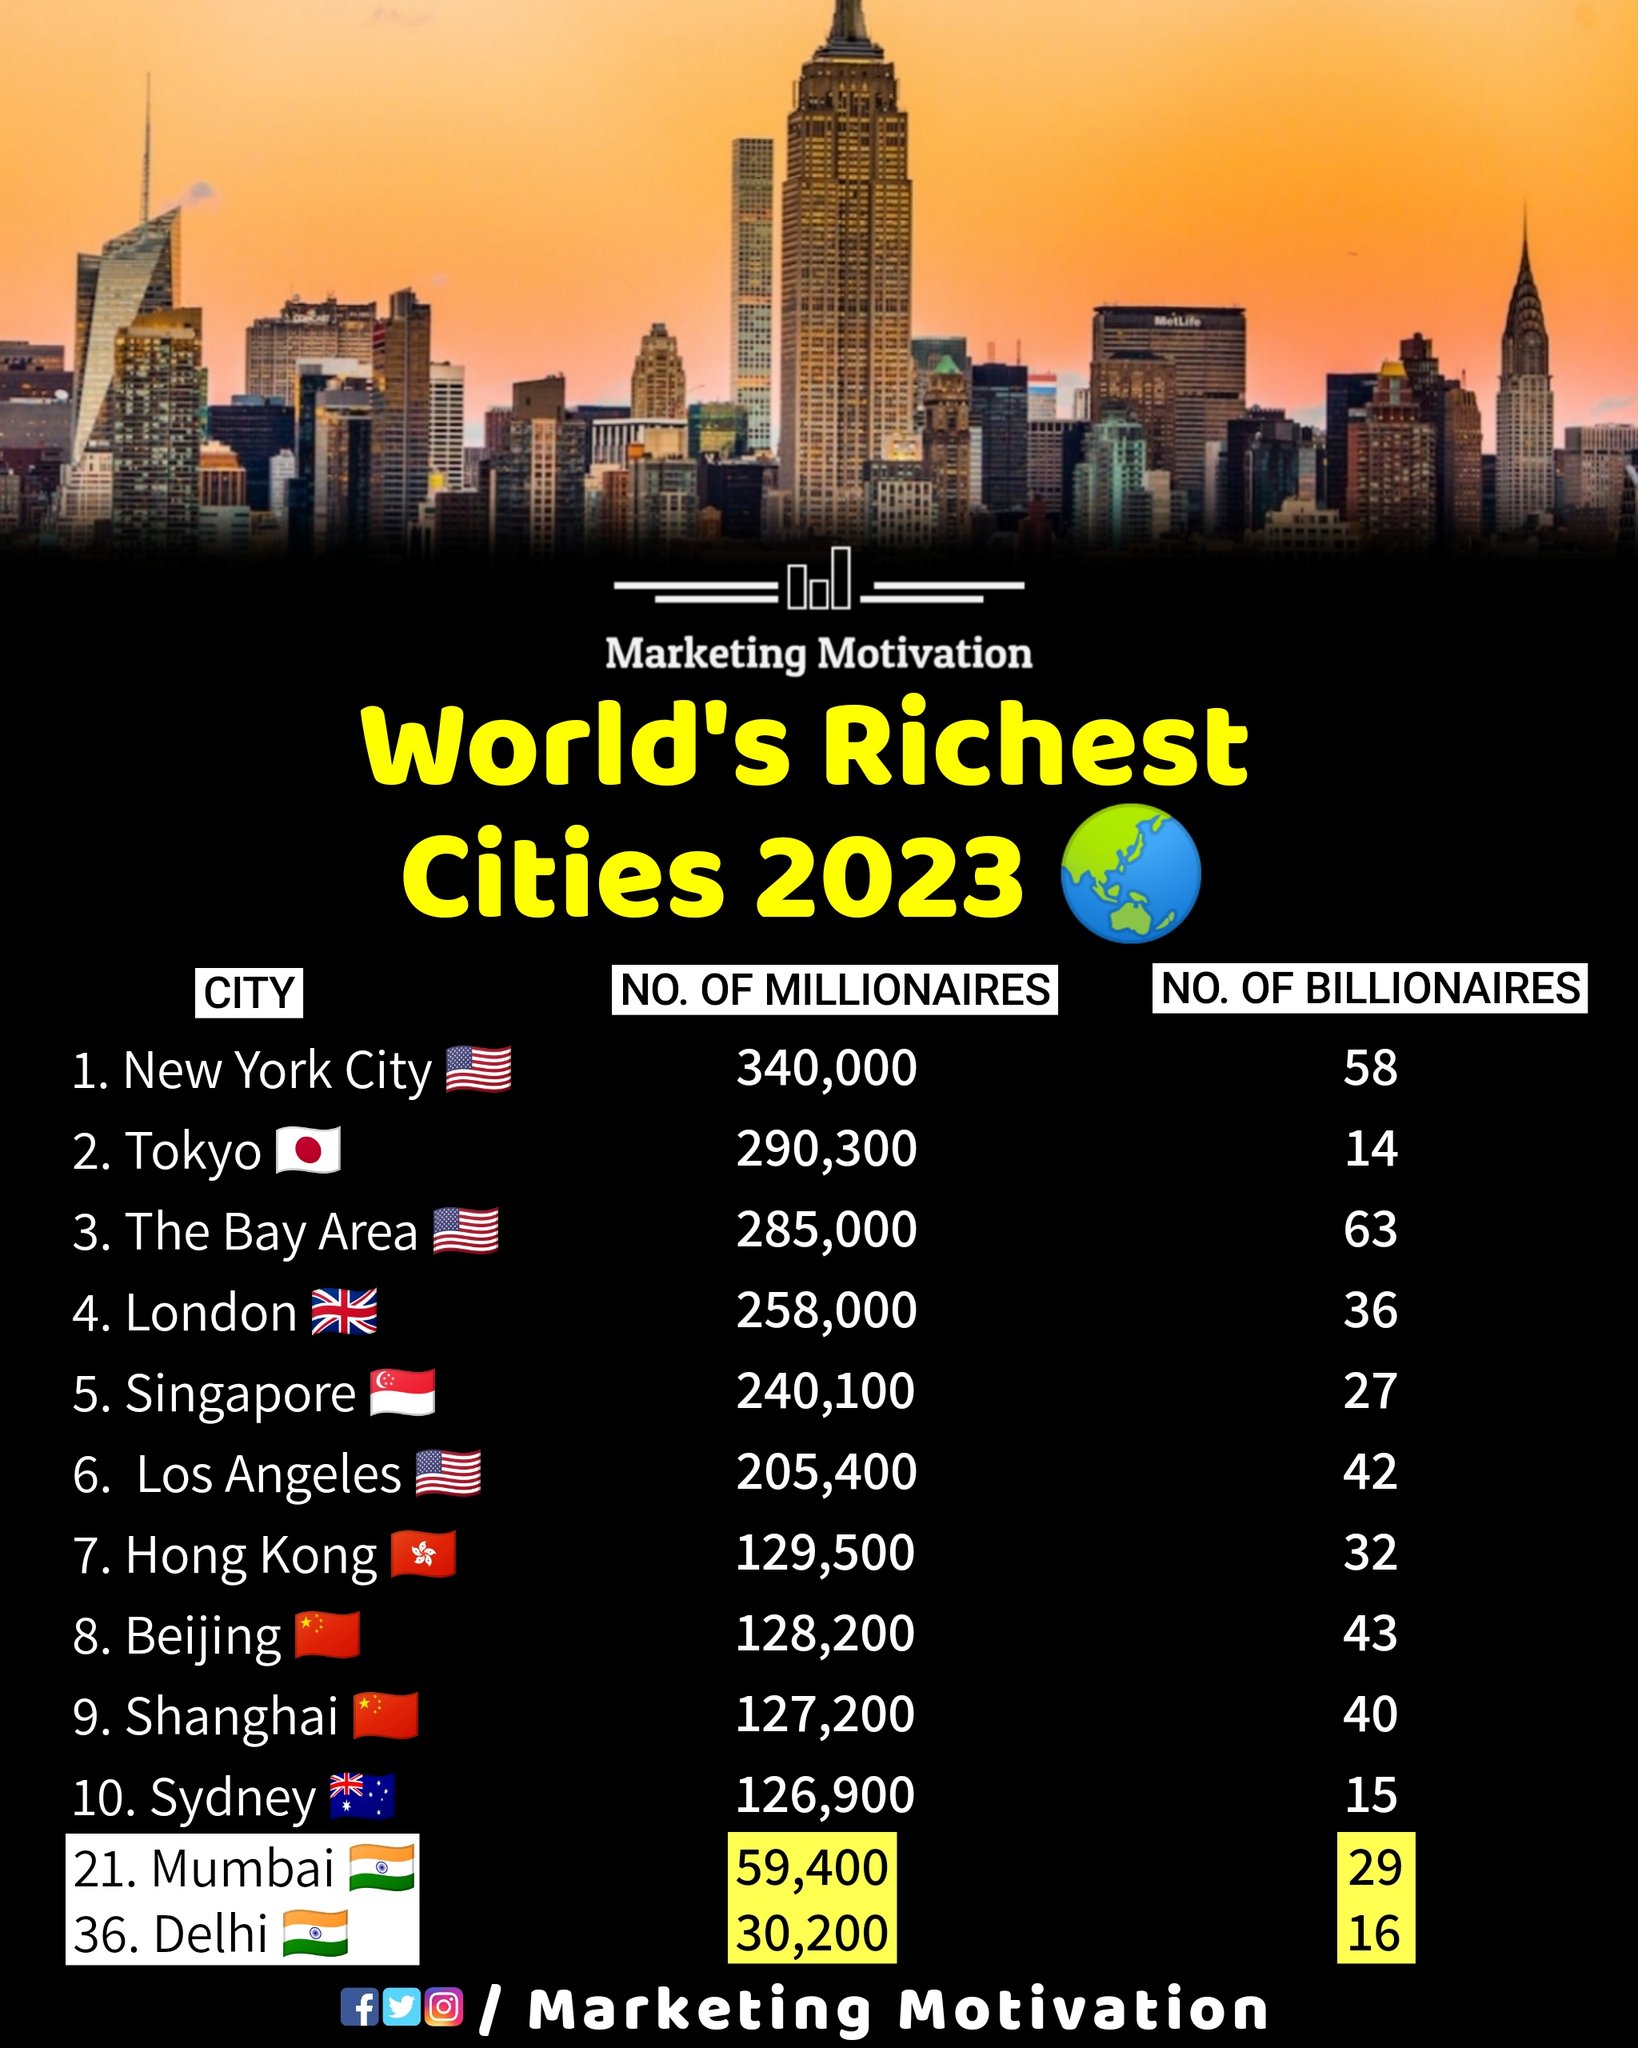 New York City tops the list of world's wealthiest cities 2023